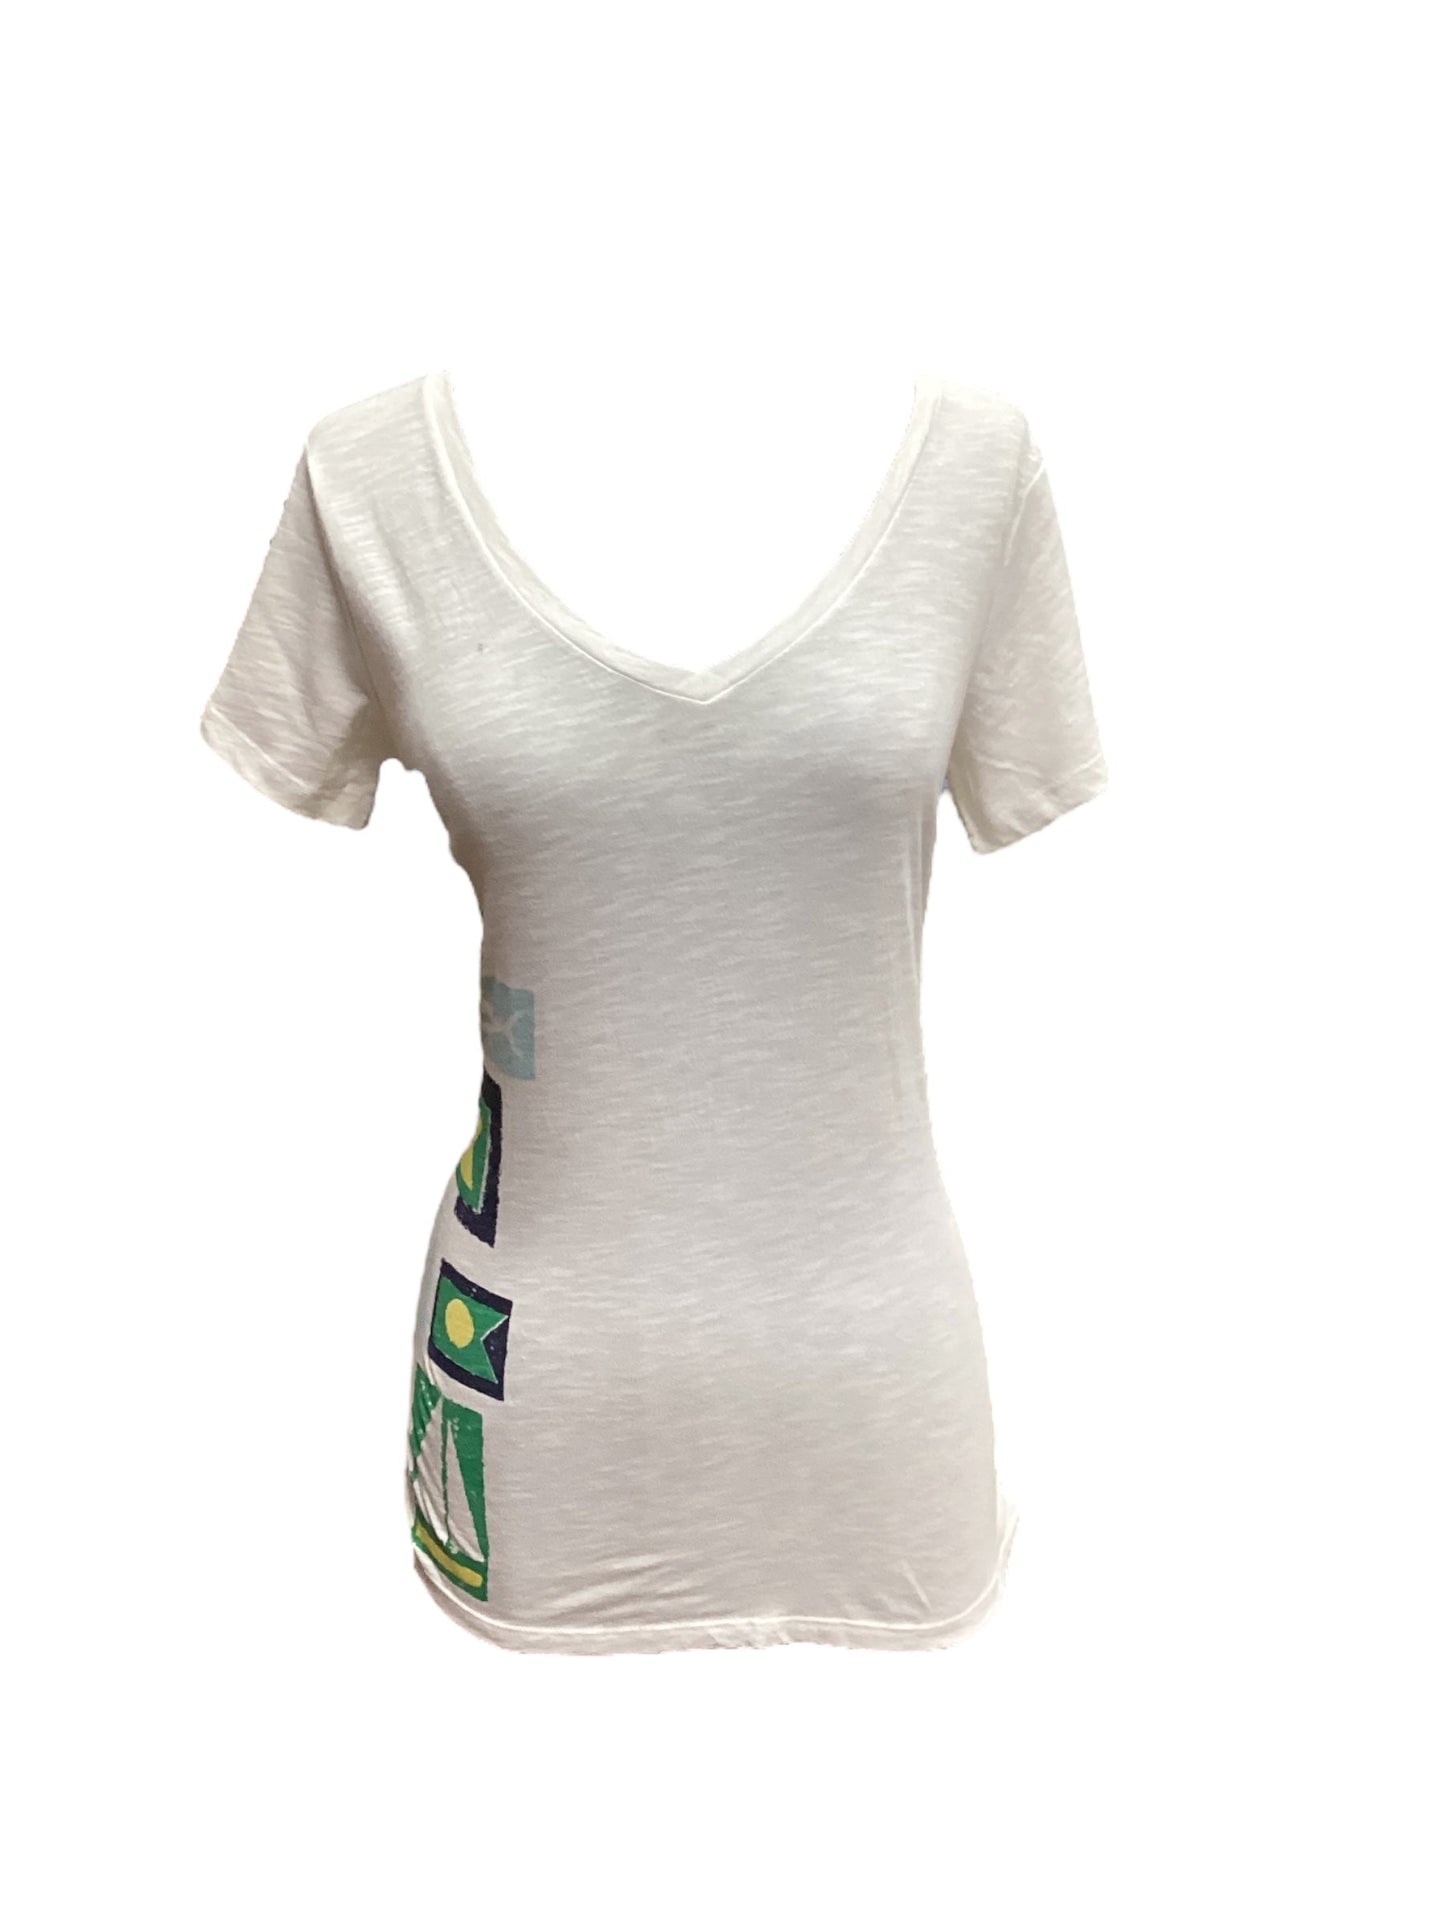 White Top Short Sleeve Columbia, Size S